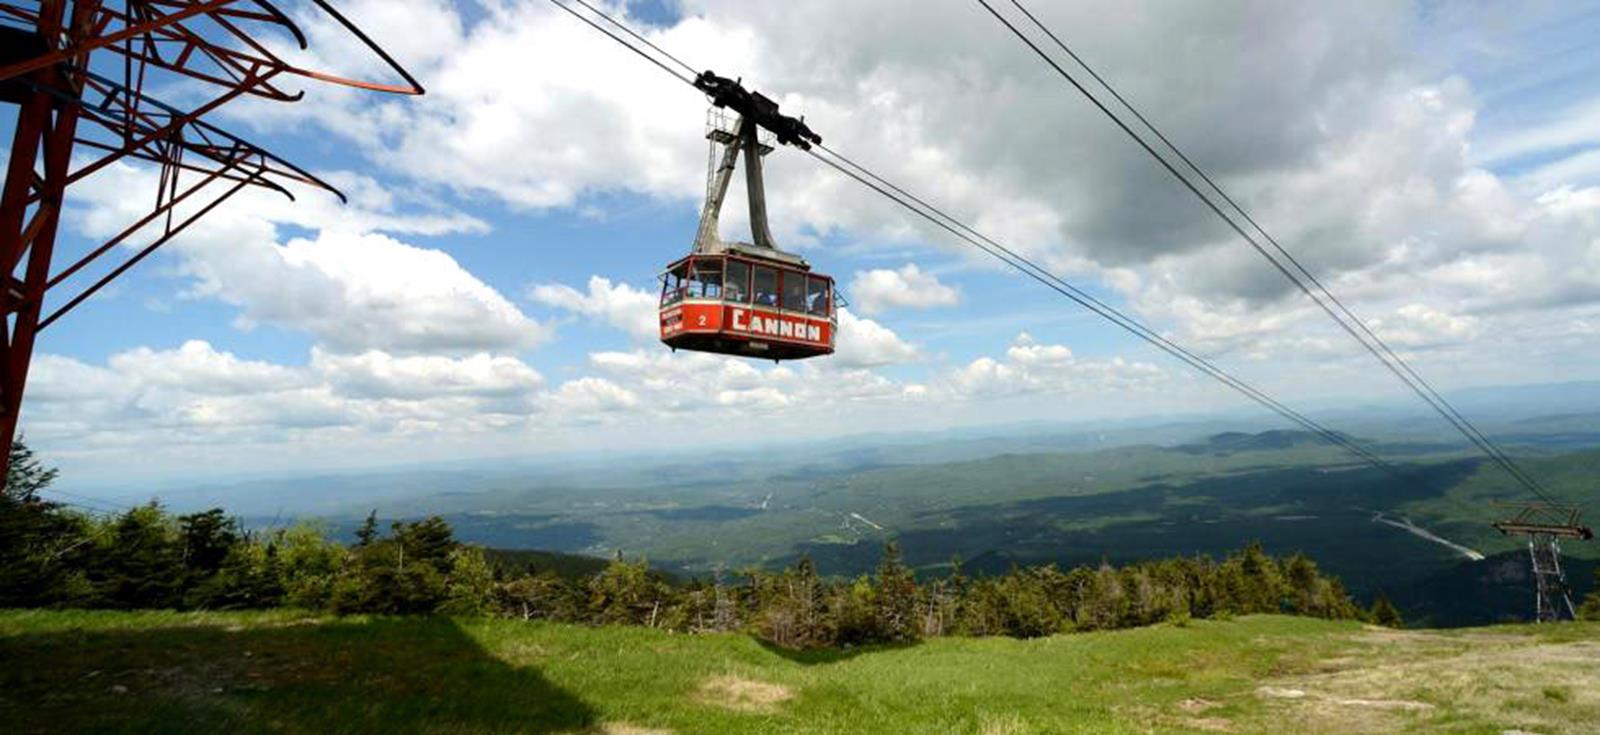 The tram over the summit. Credit: Cannon Mountain